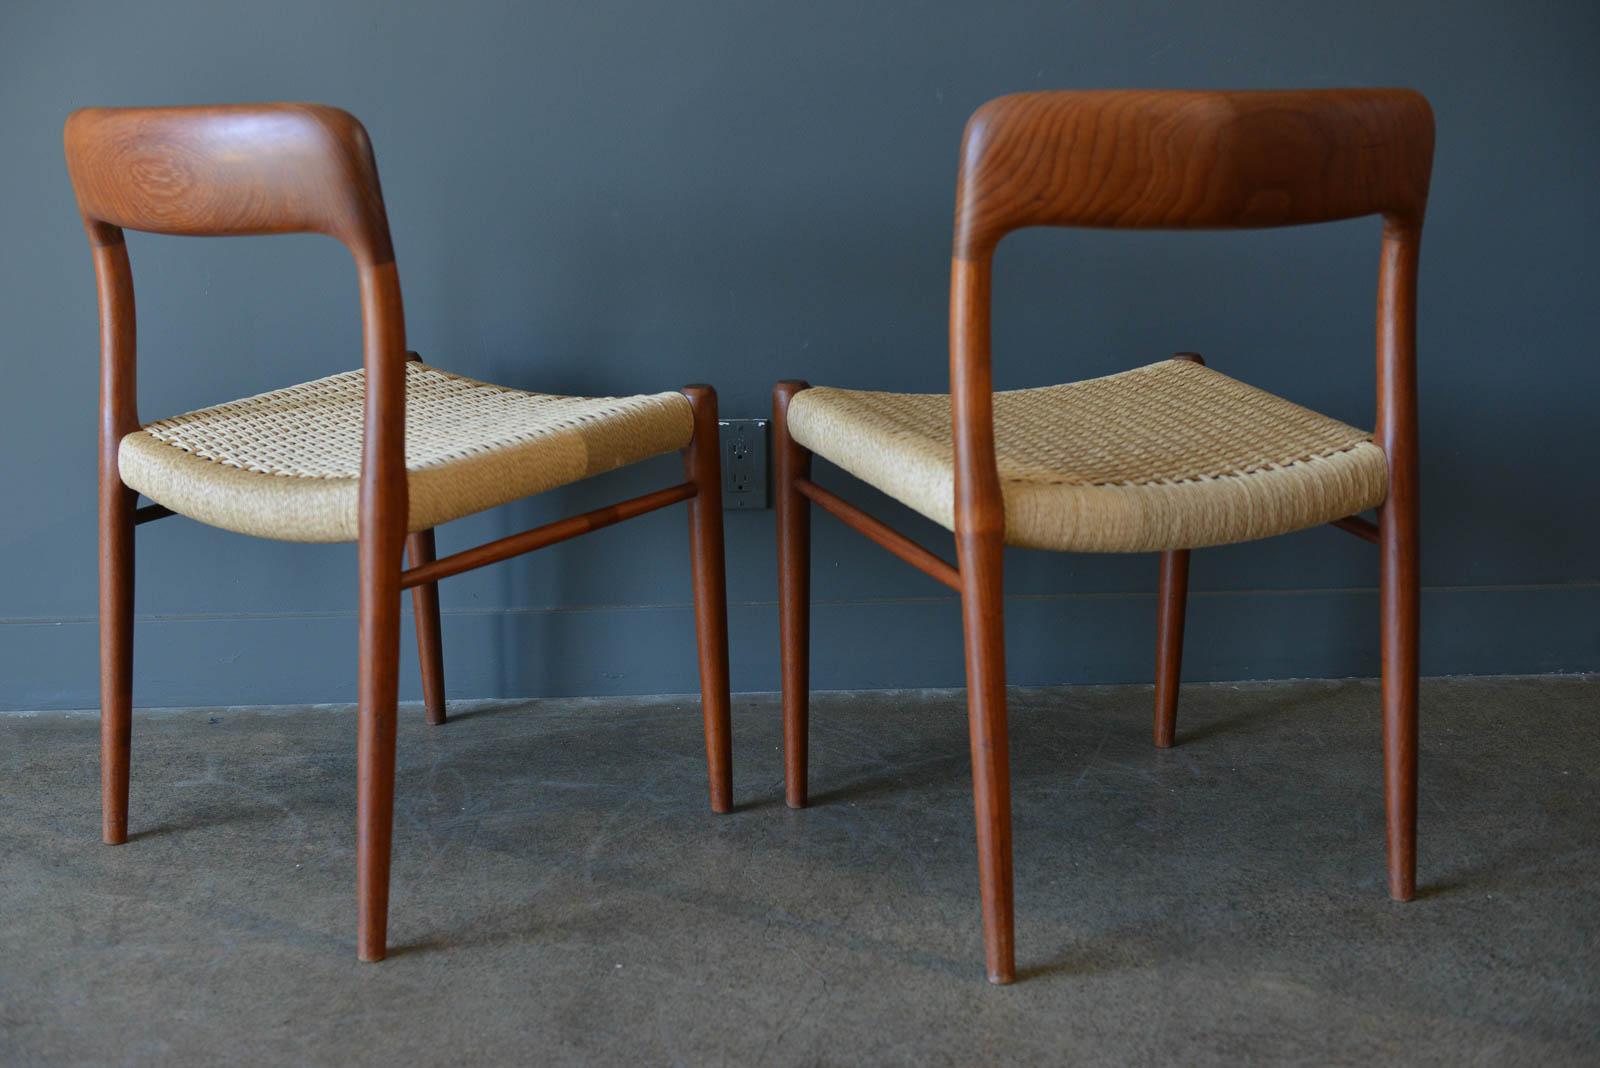 Pair of Niels Moller side or dining chairs, model 75, circa 1960. Original solid teak frames with newly restored papercord seats in period correct papercord and weave pattern.
Used as side chairs, dining chairs or to fill in your existing